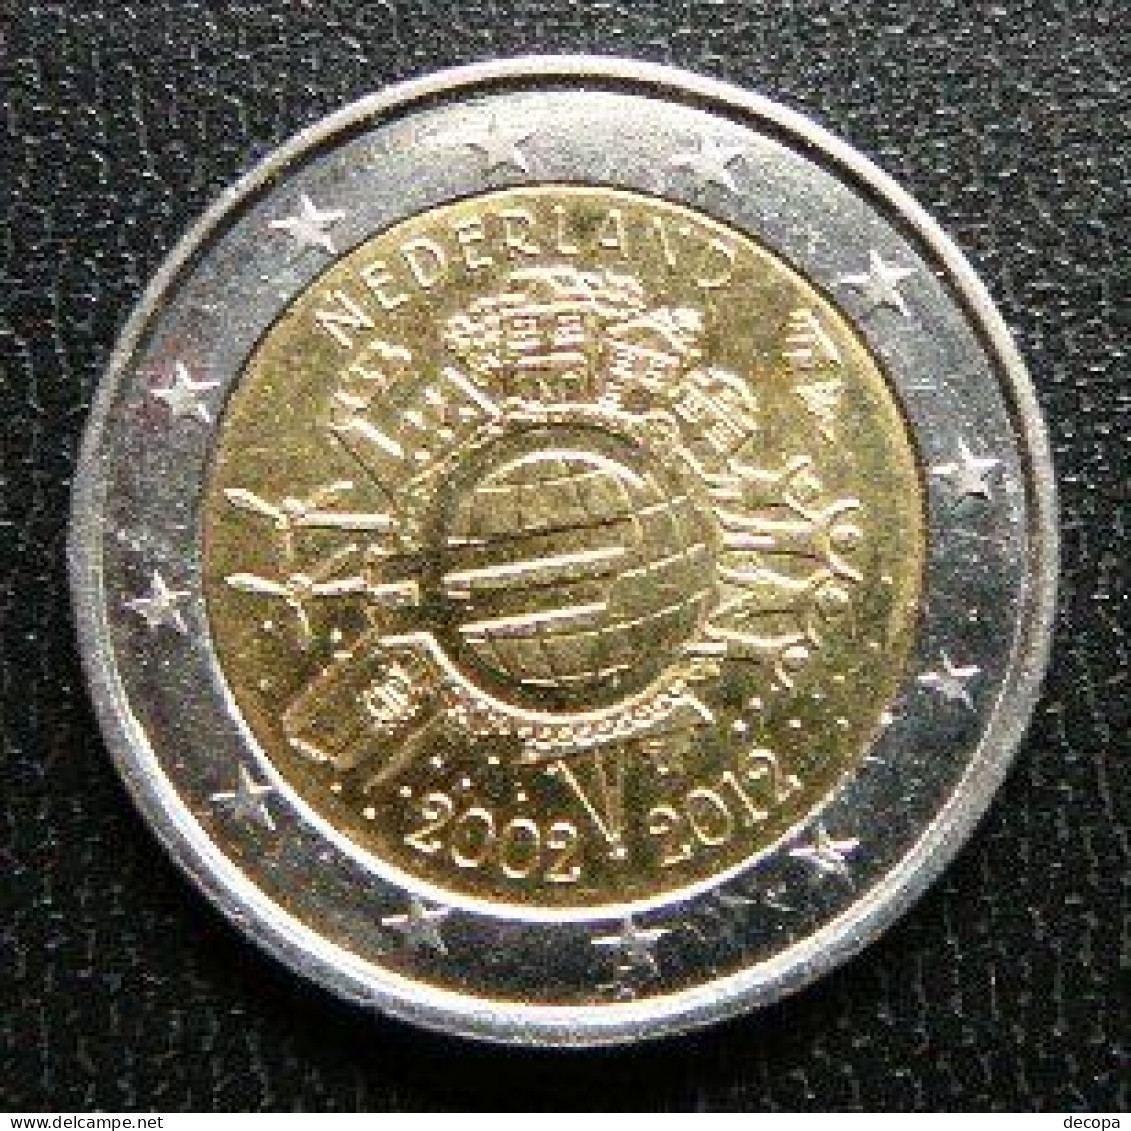 Netherlands - Pays-Bas - Nederland   2 EURO 2012  Speciale Uitgave - Commemorative - Paises Bajos